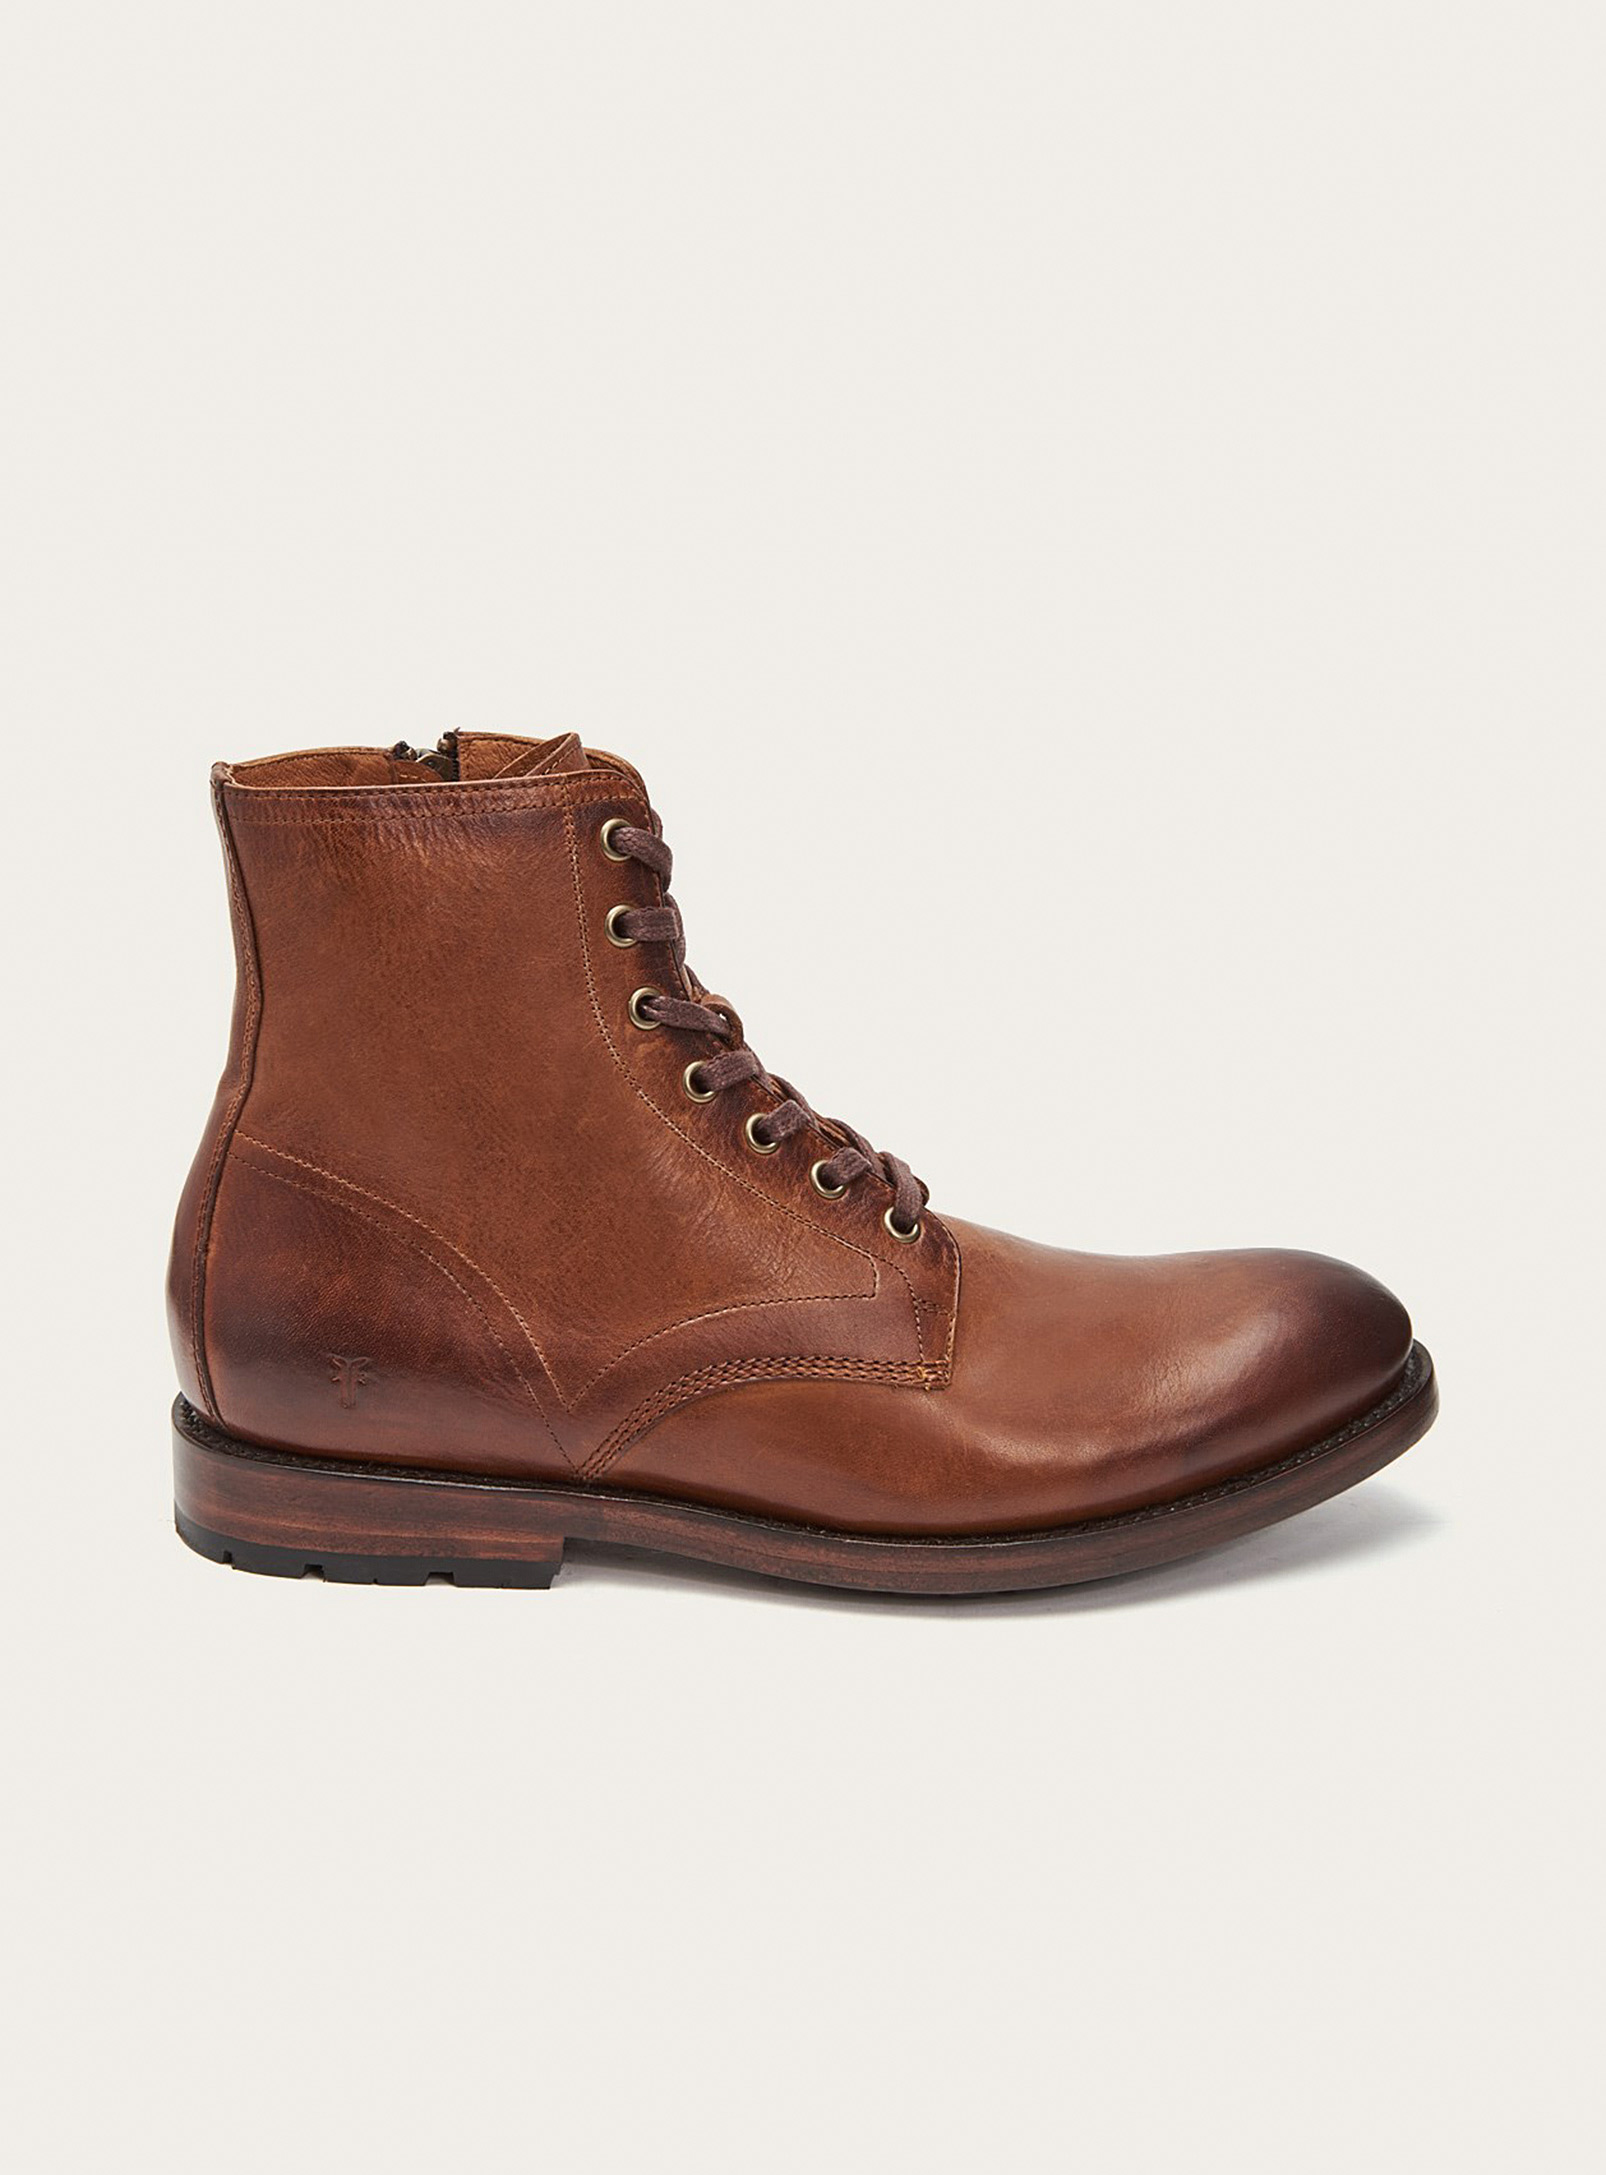 Frye - Chaussures La Botte lacée Bowery Homme